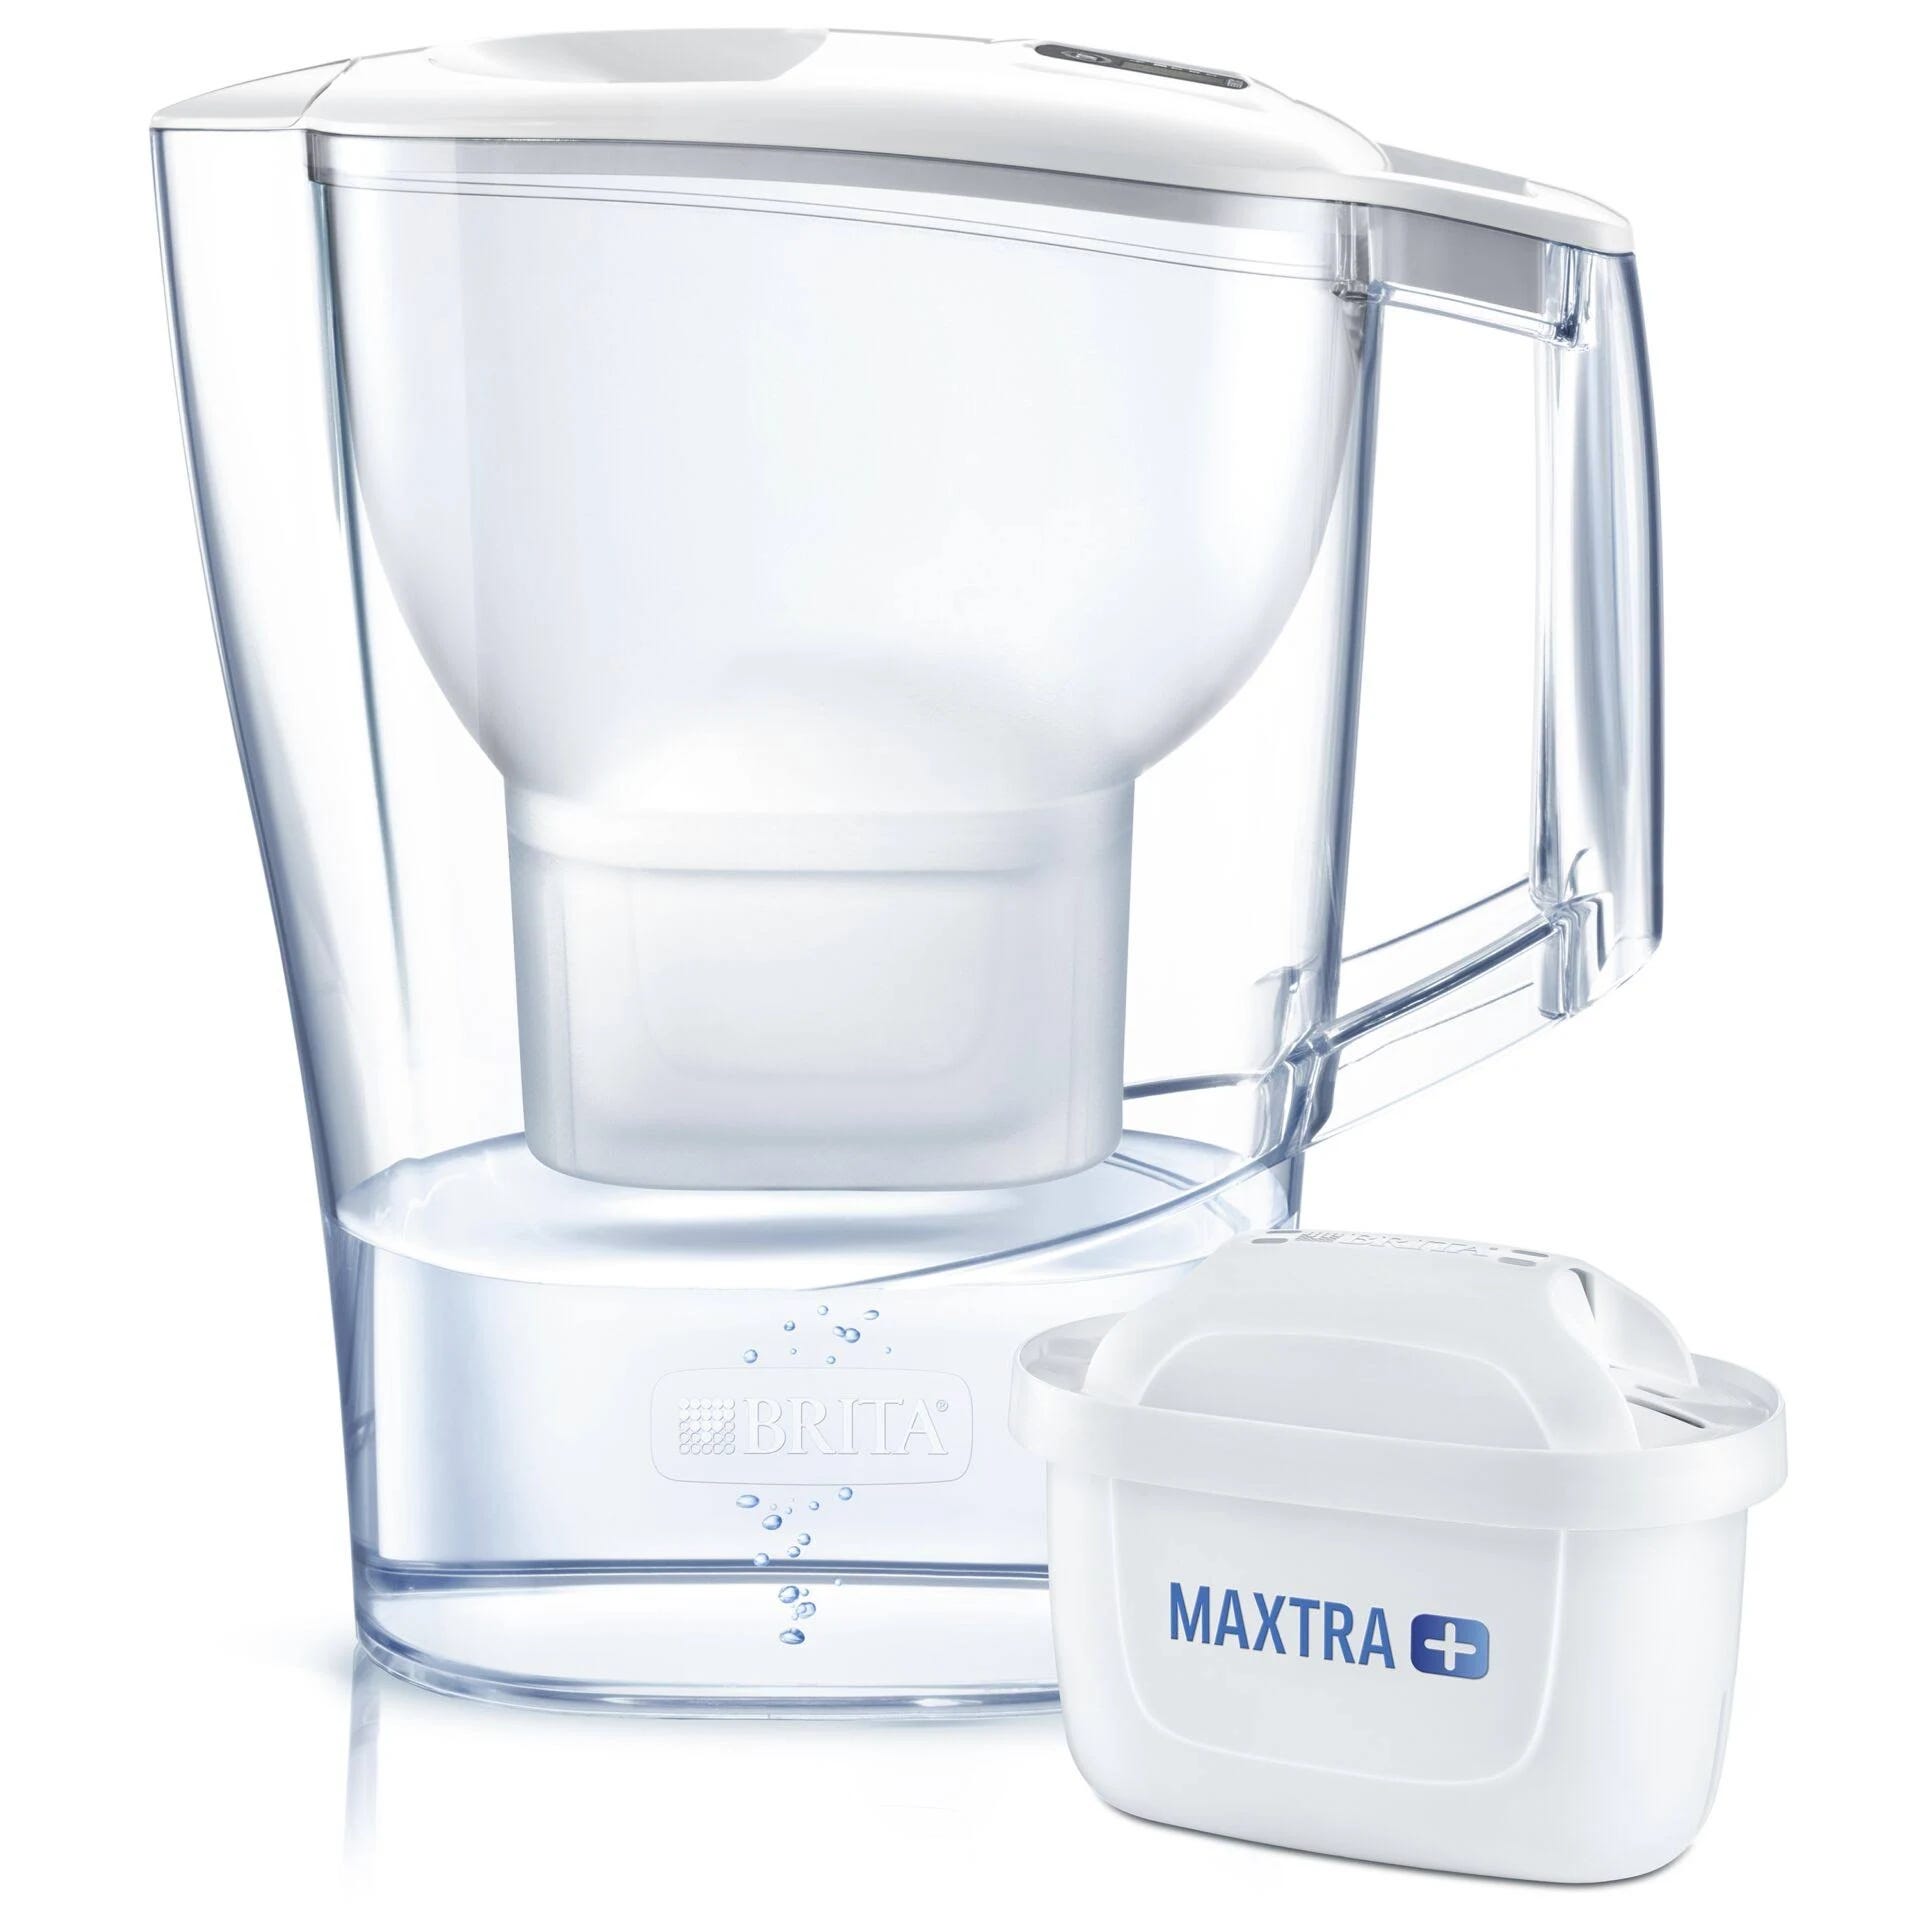 Brita Aluna Water Filter Jug: Perfect Home Solution for Pure and Refreshing Drinking Water | Image